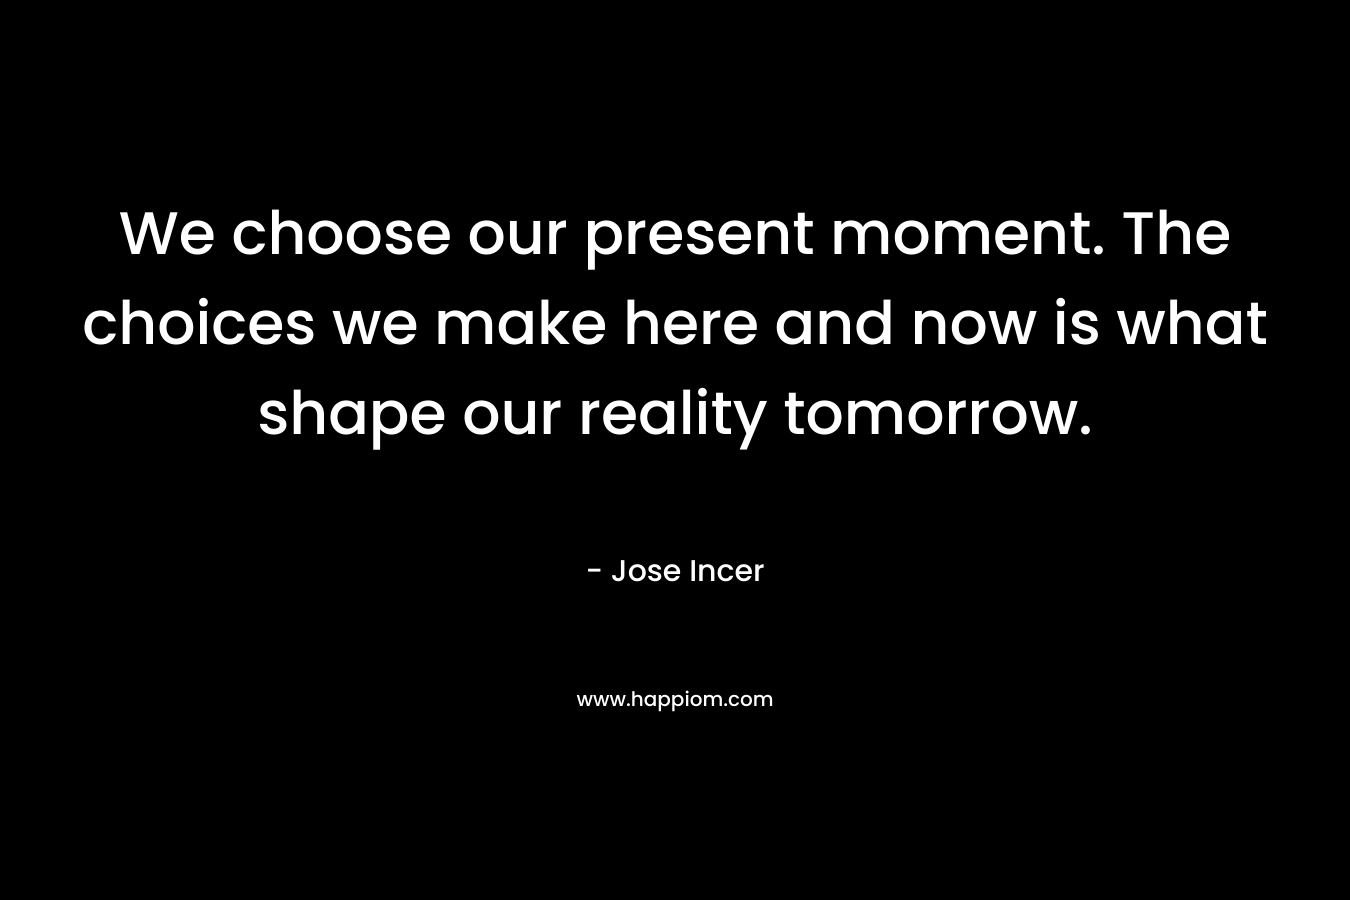 We choose our present moment. The choices we make here and now is what shape our reality tomorrow.